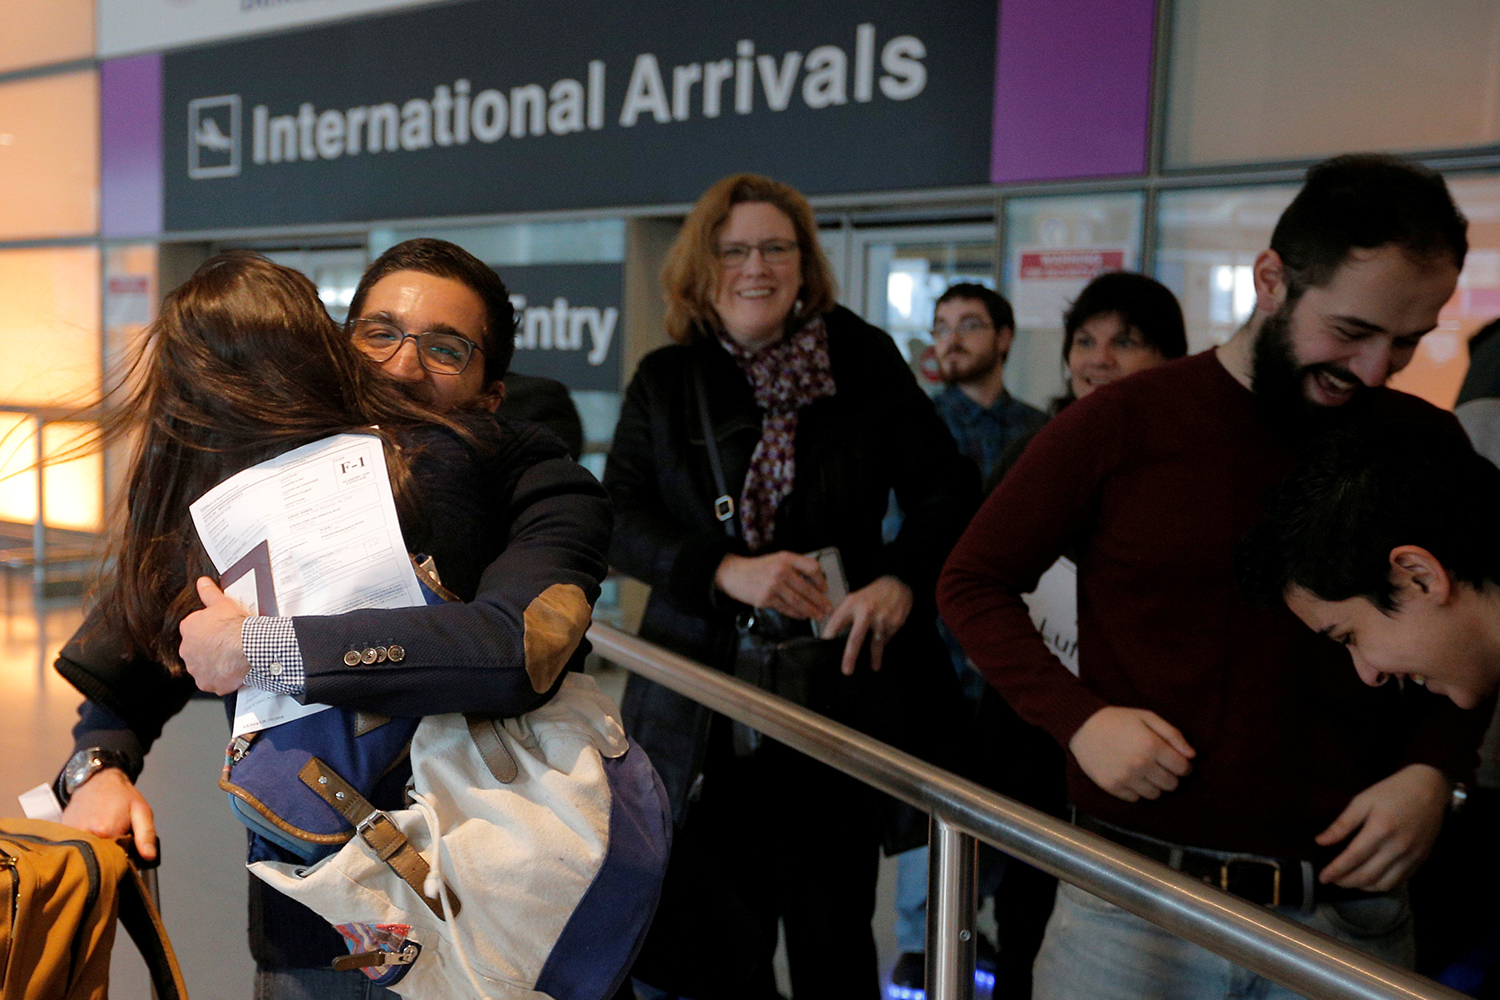 BOSTON 2017-02-04 Behnam Partopour, a Worcester Polytechnic Institute (WPI) student from Iran, is greeted by his sister Bahar (L) at Logan Airport after he cleared U.S. customs and immigration on an F1 student visa in Boston, Massachusetts, U.S. February 3, 2017.  Partopour was originally turned away from a flight to the U.S. following U.S. President Donald Trump's executive order travel ban.   REUTERS/Brian Snyder     TPX IMAGES OF THE DAY Photo:  / REUTERS / TT / kod 72000